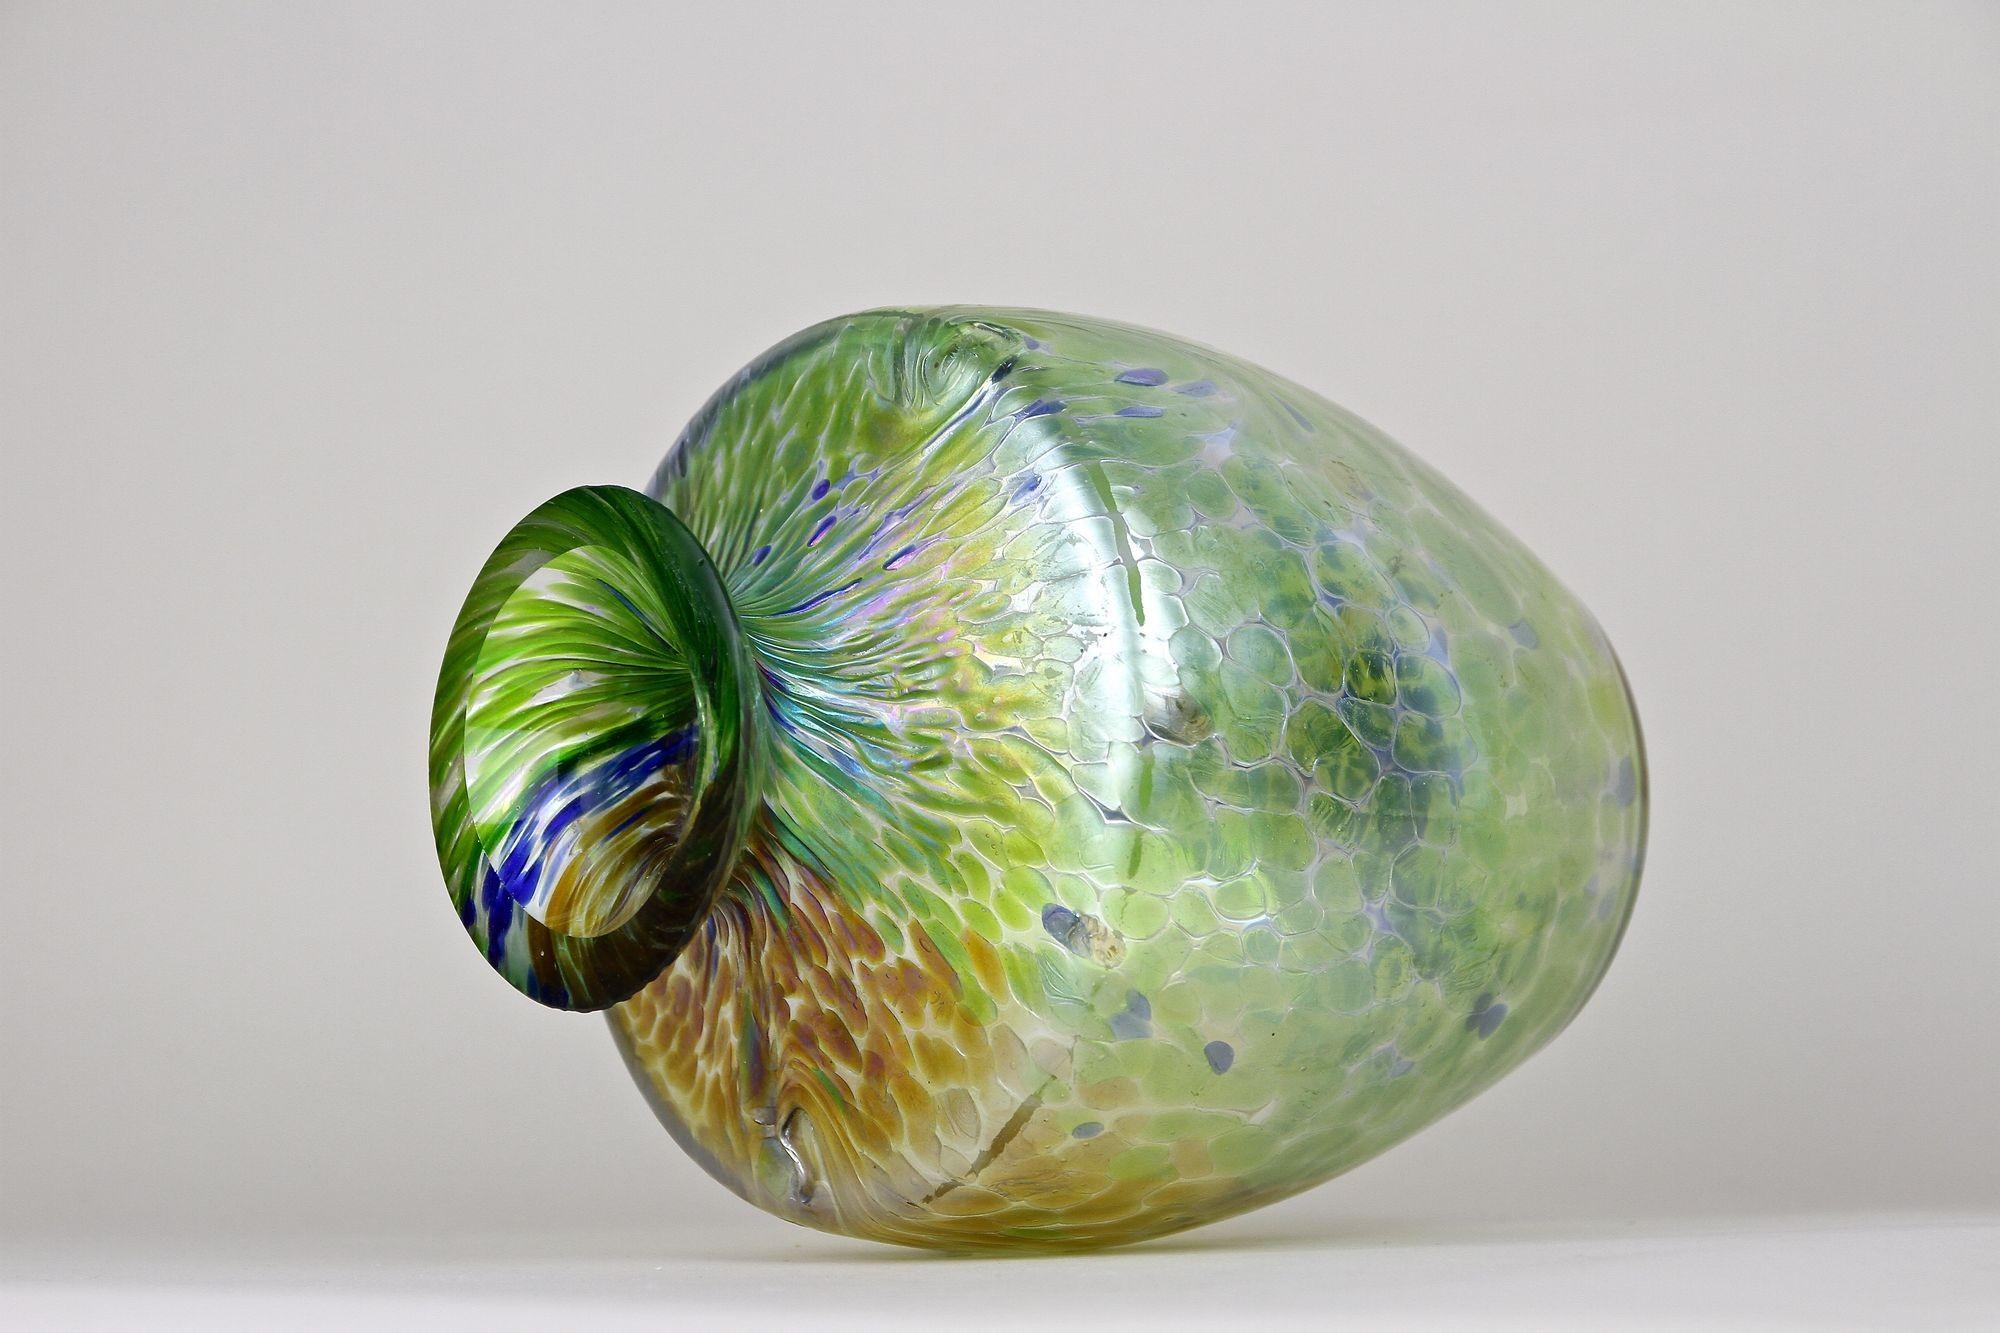 Iridescent Art Nouveau Glass Vase Attributed To Fritz Heckert, Bohemia ca. 1905 For Sale 11